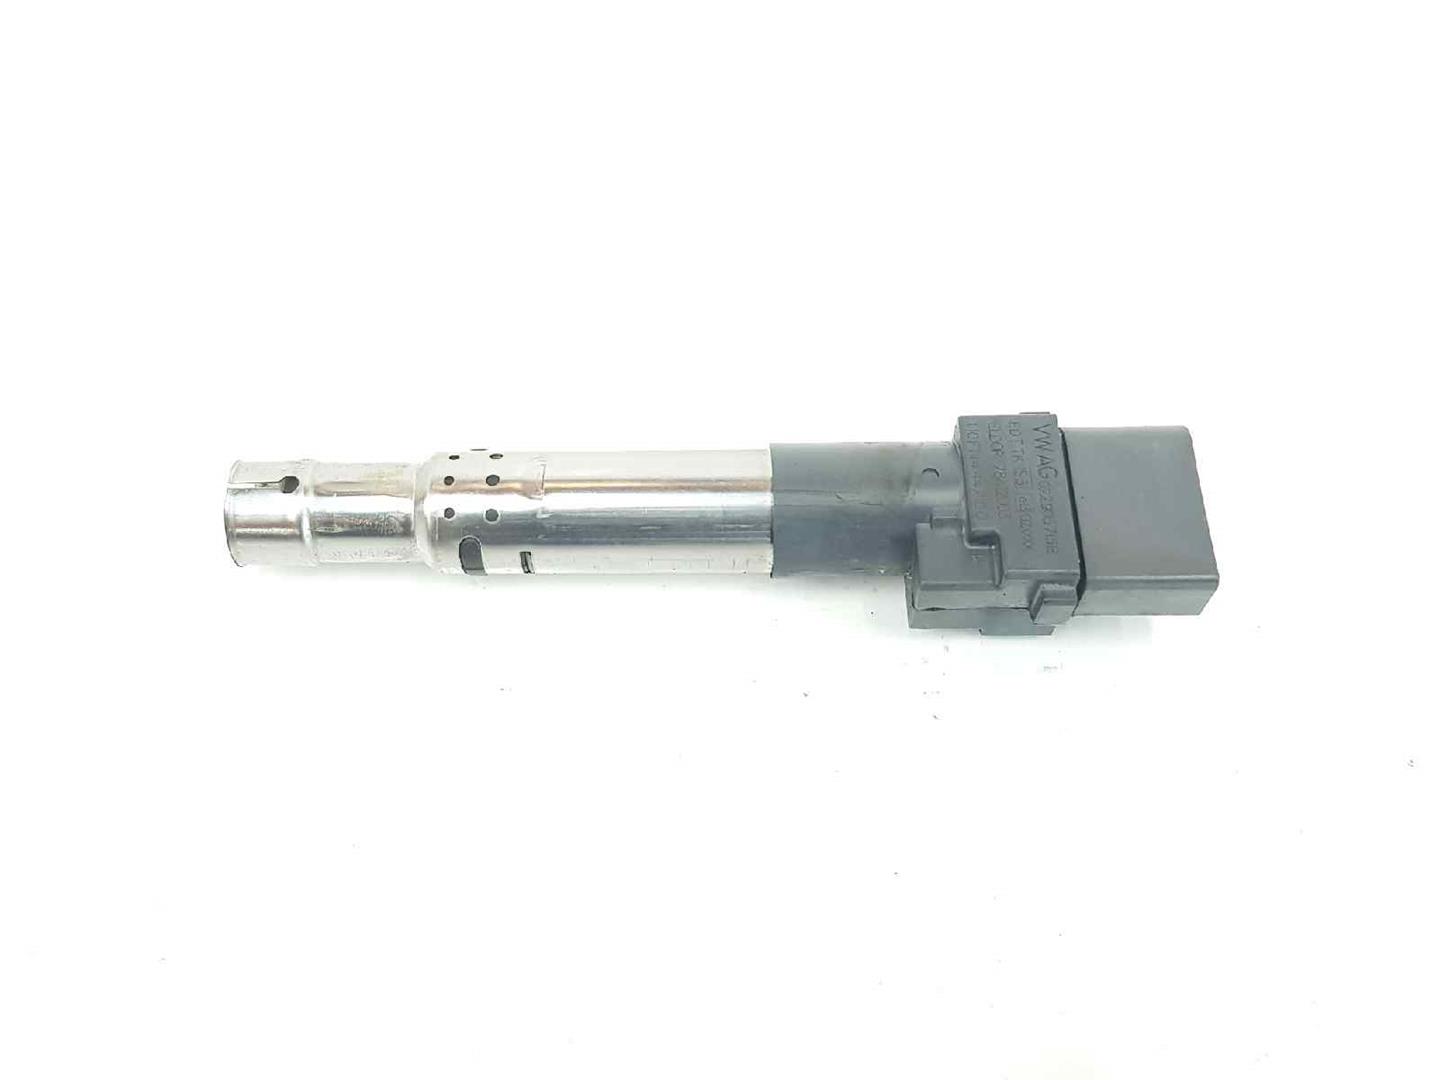 AUDI A2 8Z (1999-2005) High Voltage Ignition Coil 022905715B, 022905715B 19686174